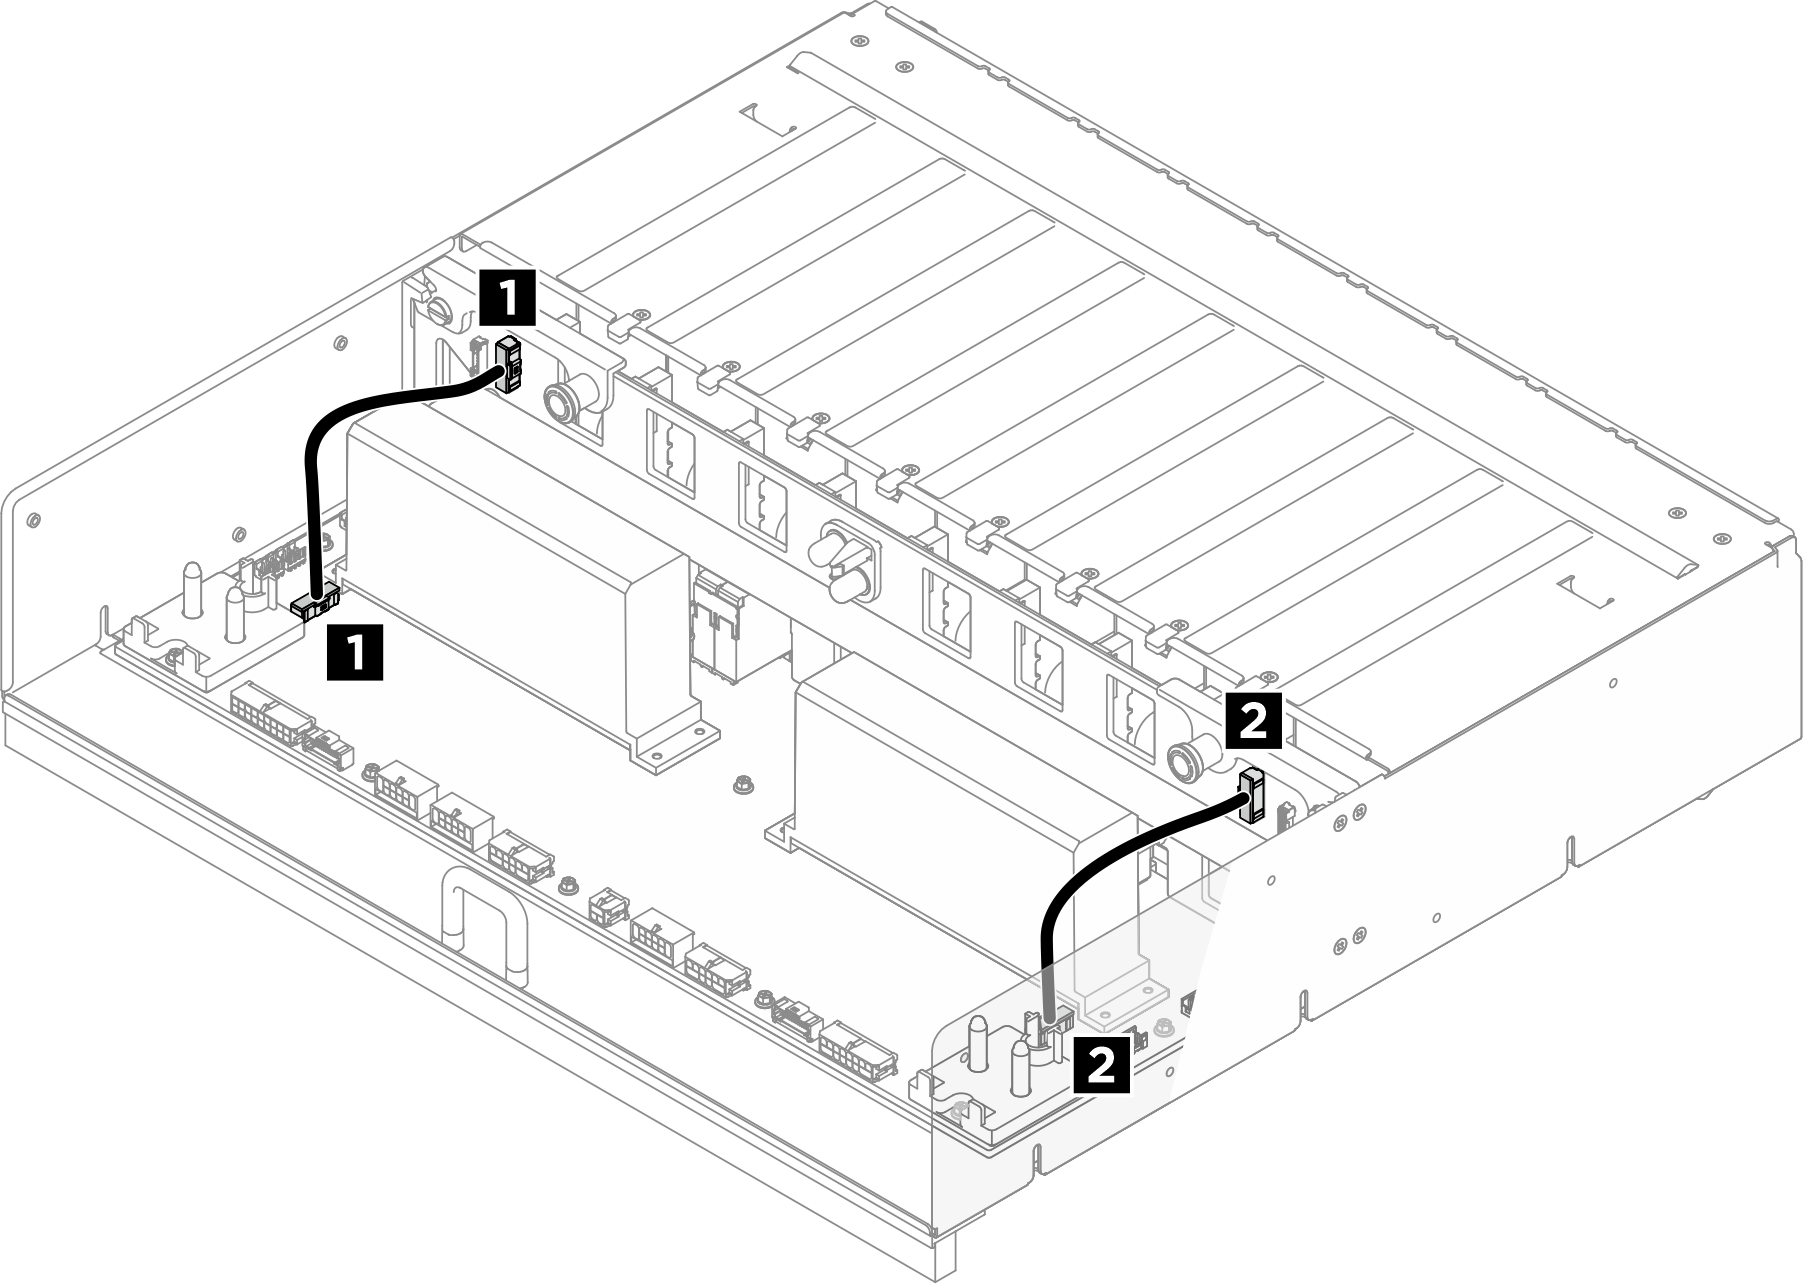 PSU-Interposer cable routing